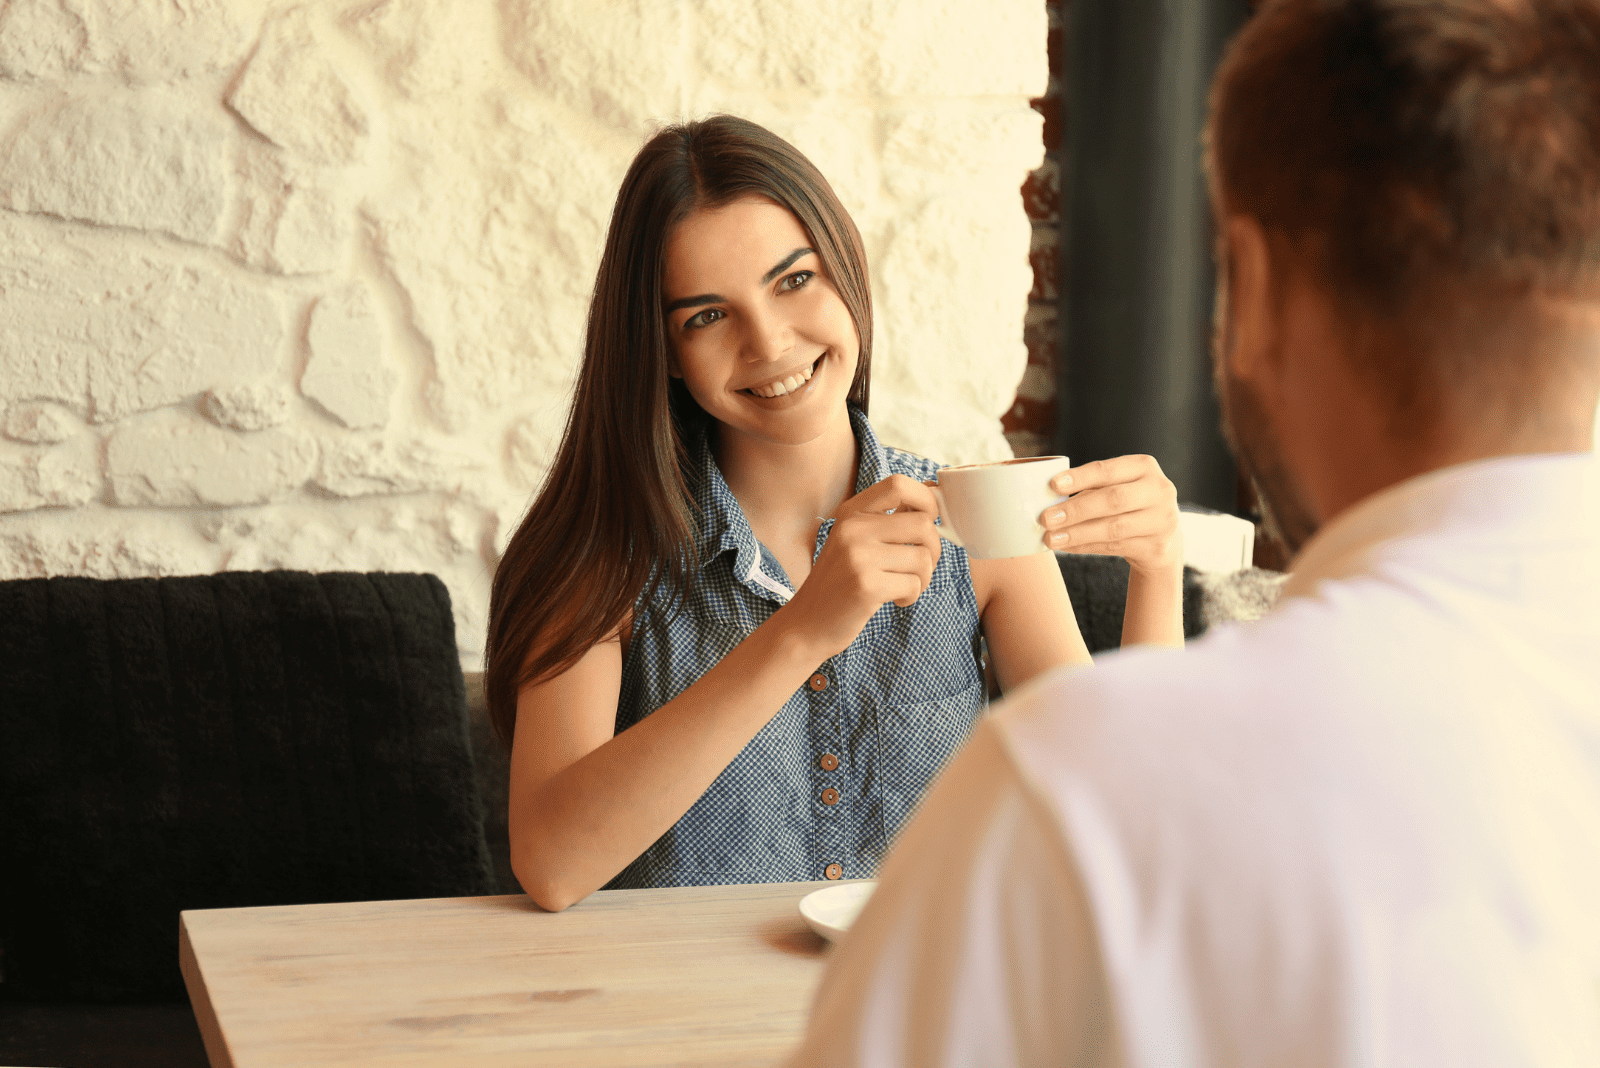 a beautiful woman drinks coffee with a man